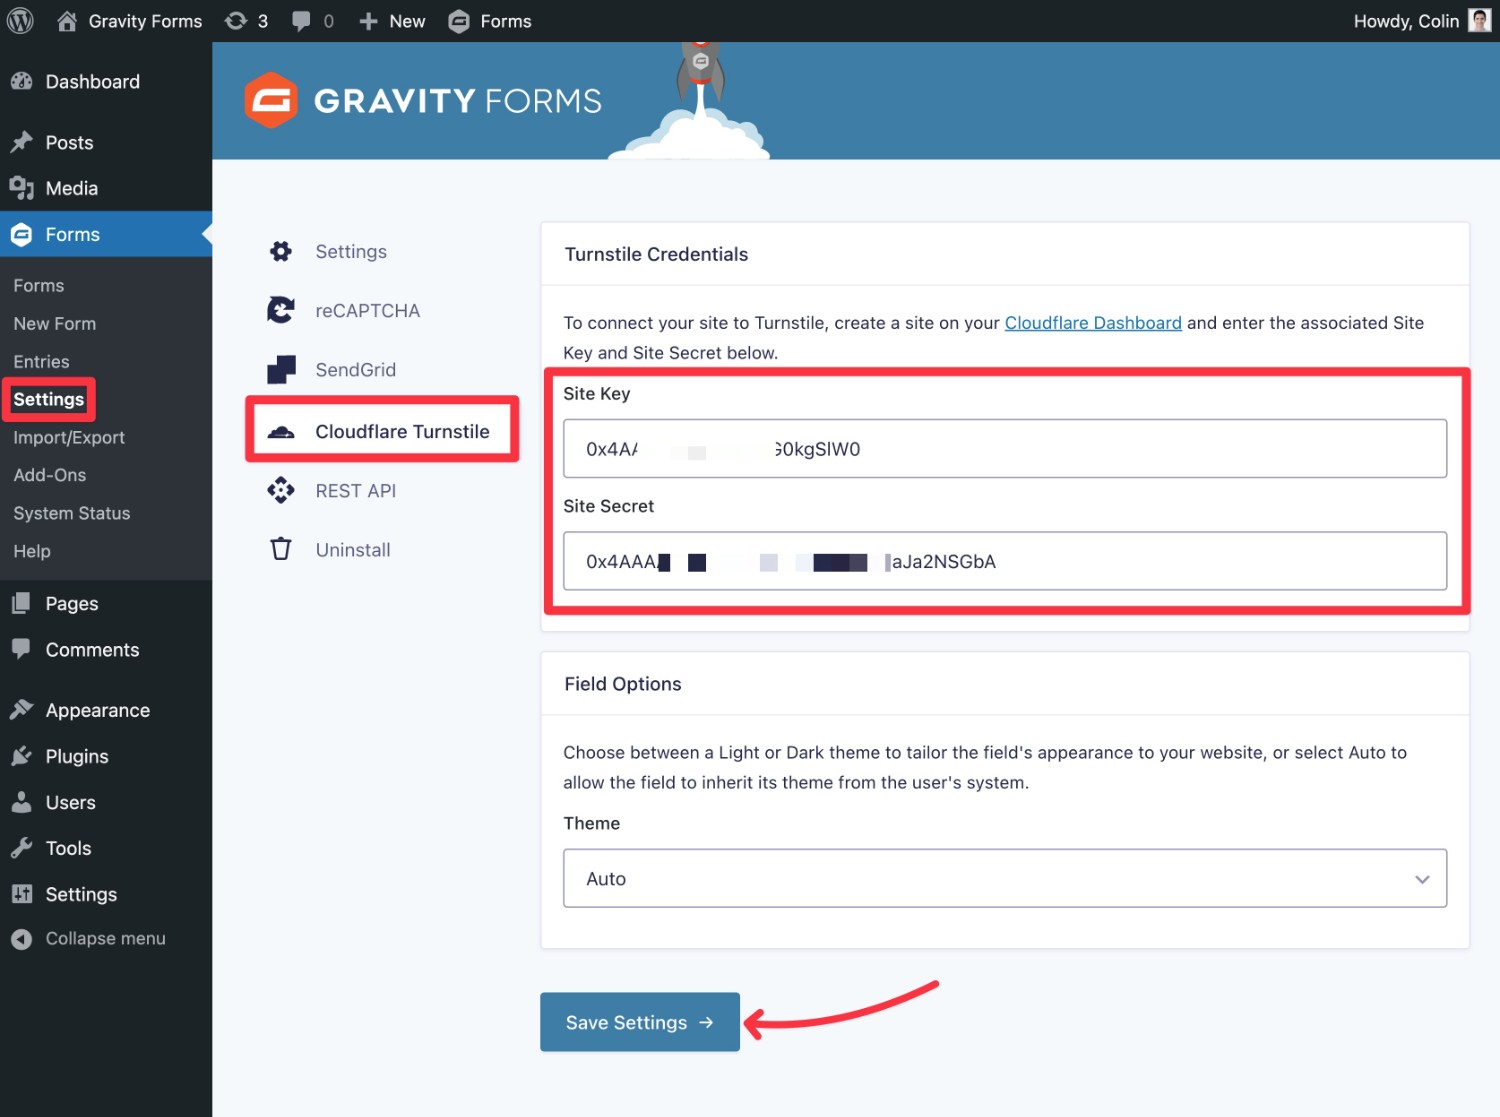 Add Cloudflare Turnstile Site Keys to Gravity Forms